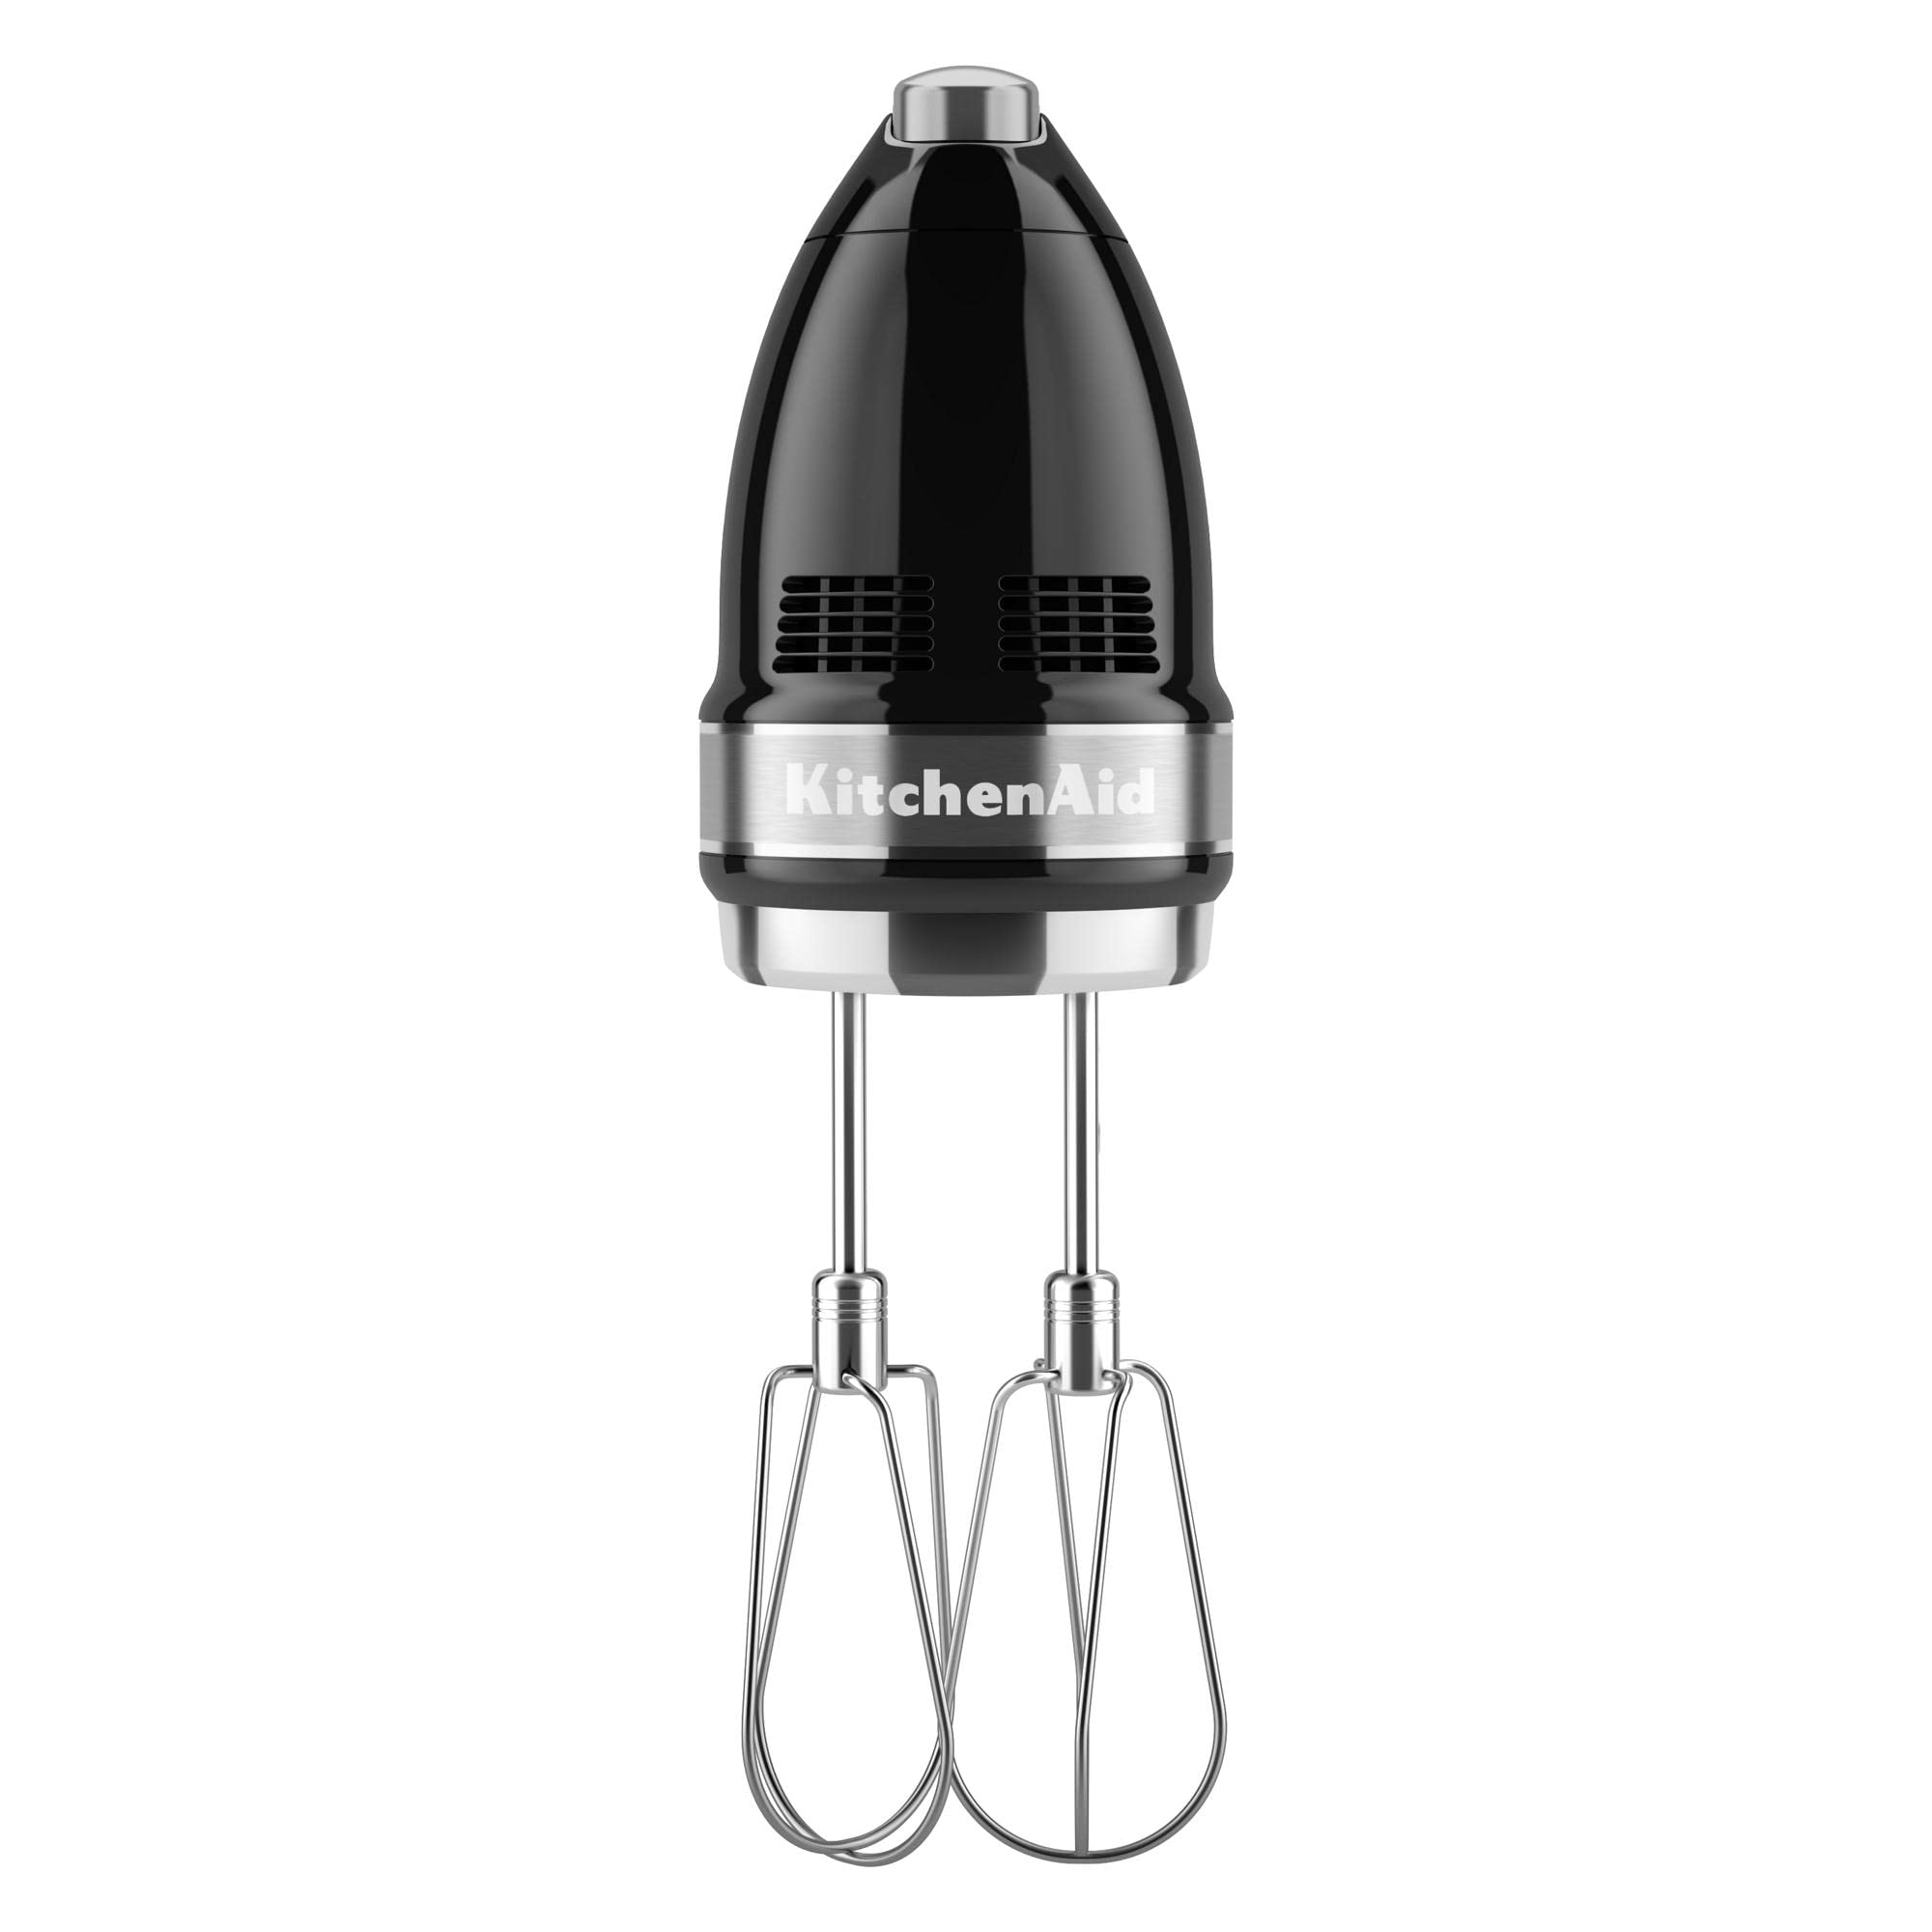 KitchenAid 9-Speed Digital Hand Mixer with Turbo Beater II Accessories and Pro Whisk - Onyx Black & KHMFEB2 Flex Edge Beater Accessory for Hand Mixer, One Size, Stainless Steel